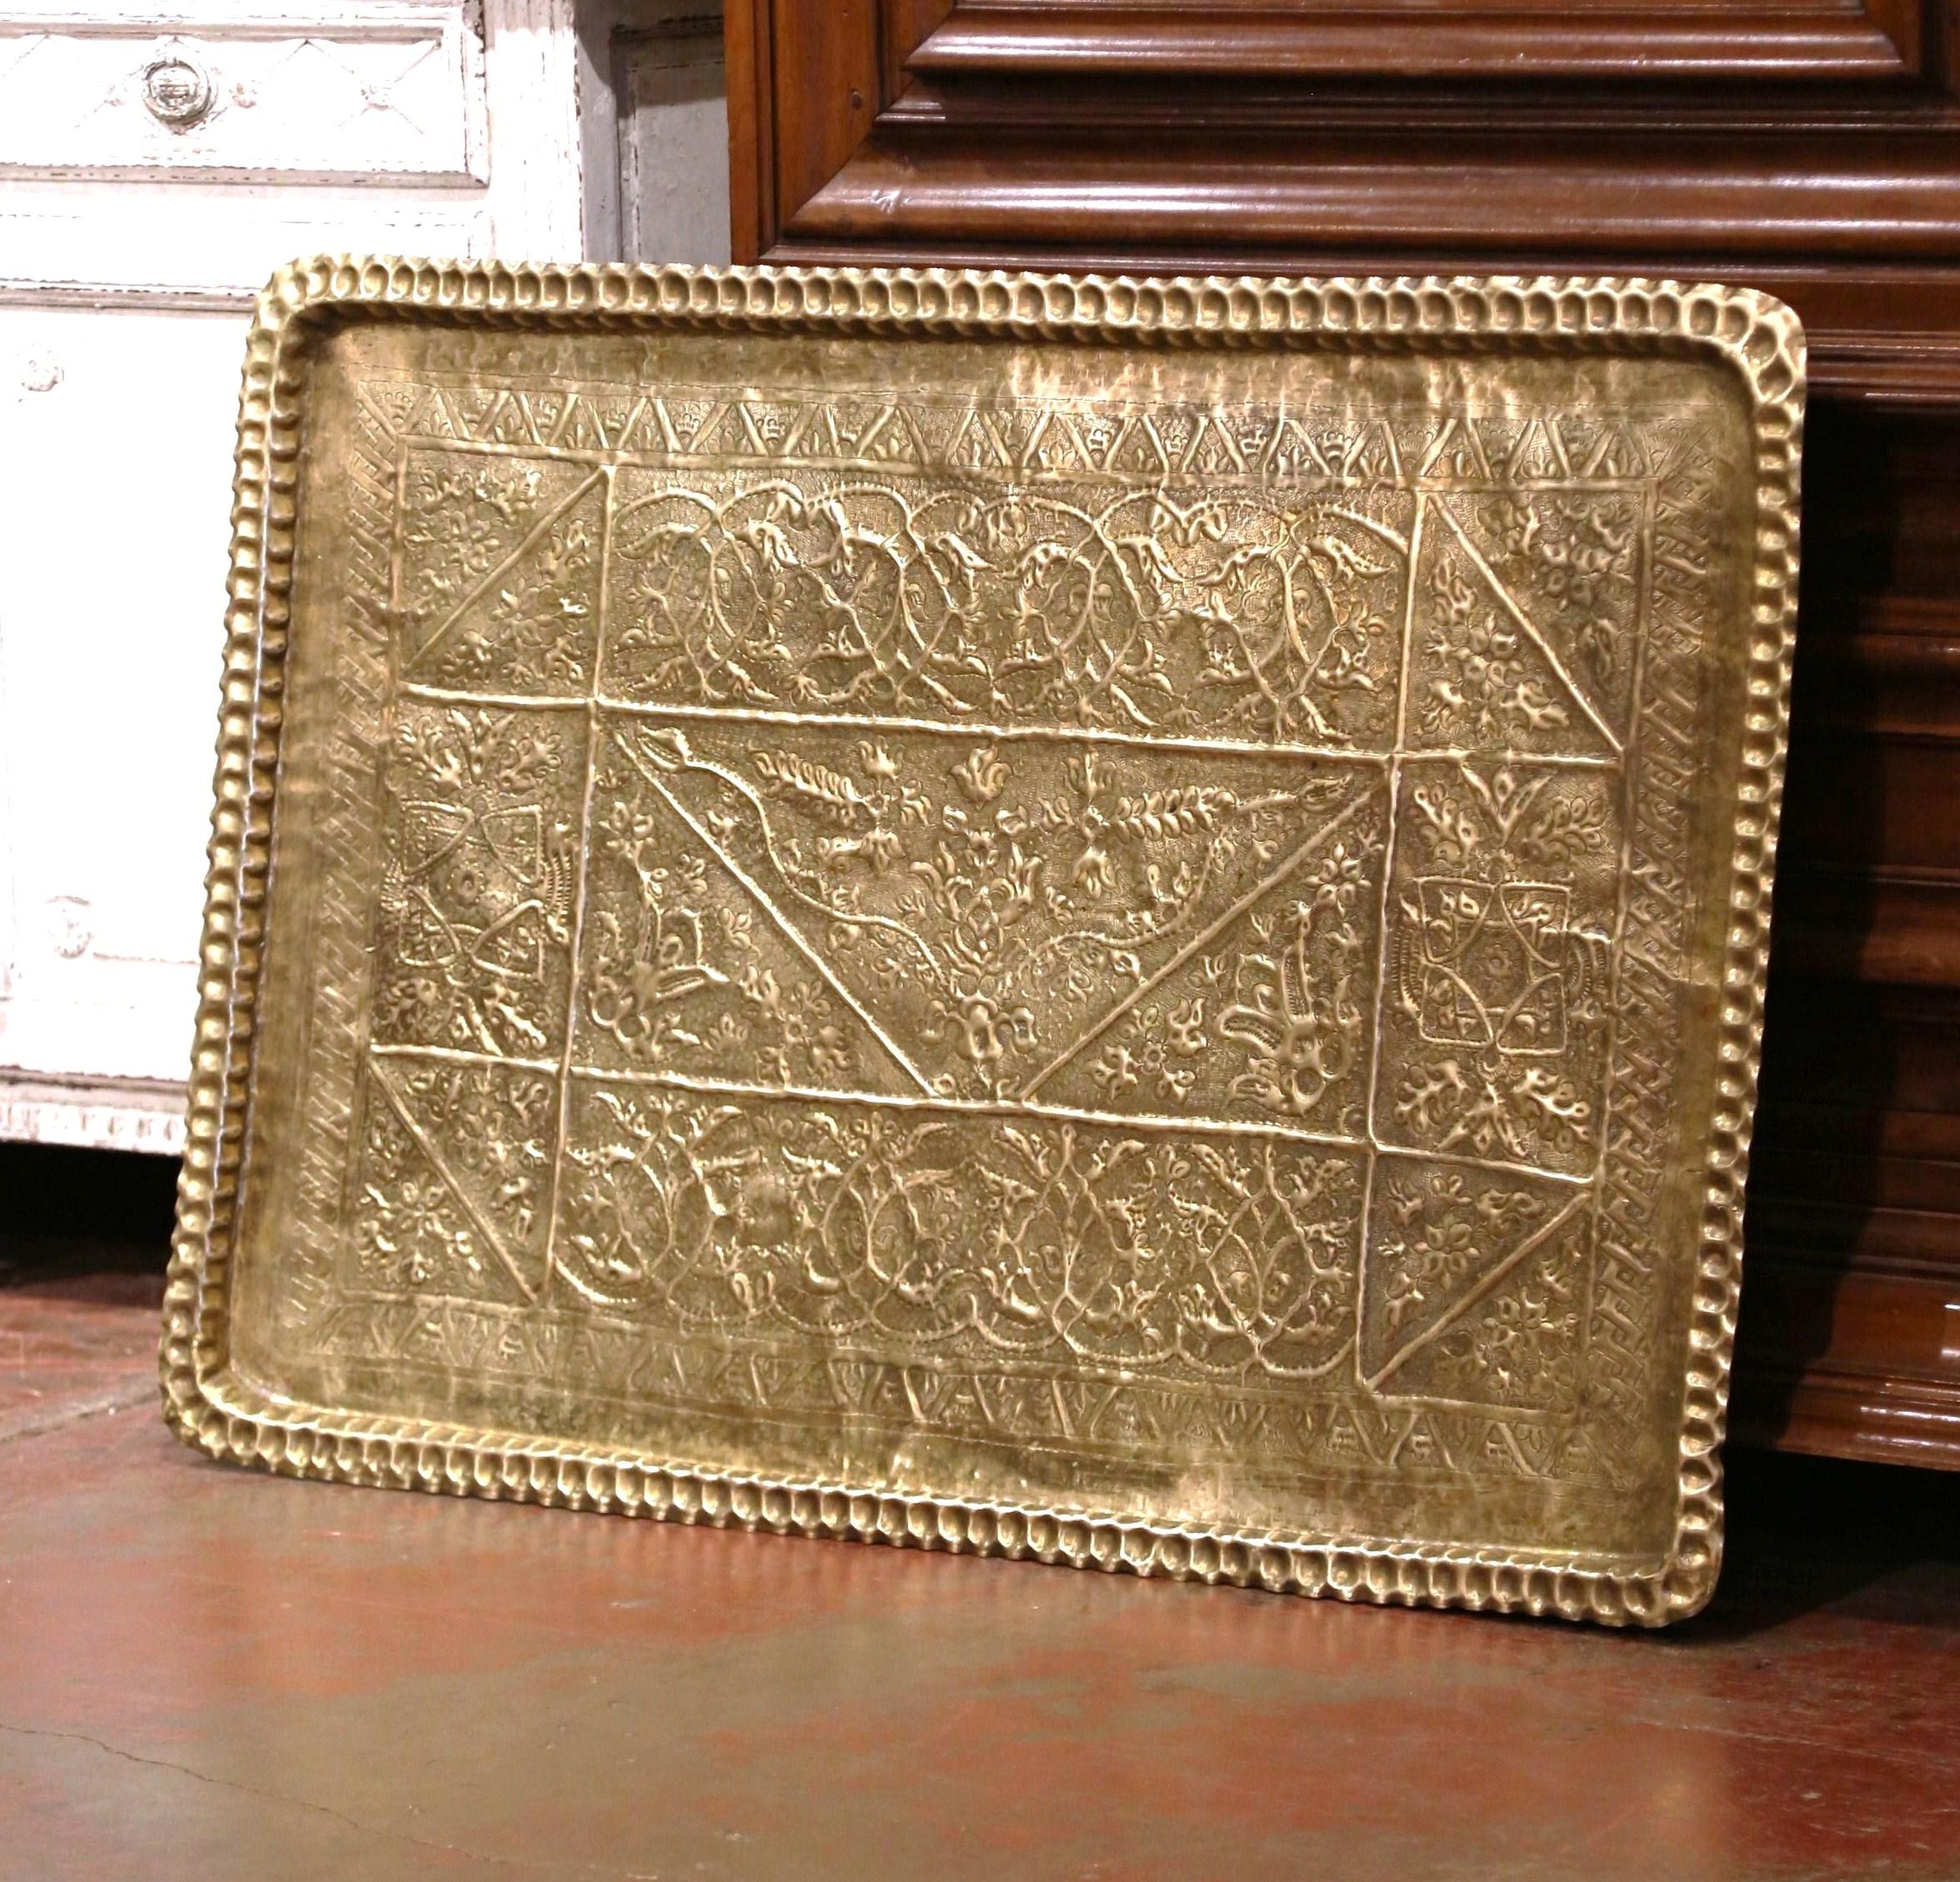 Repoussé Mid-19th Century French Ornate Brass Tray with Floral Repousse Motifs